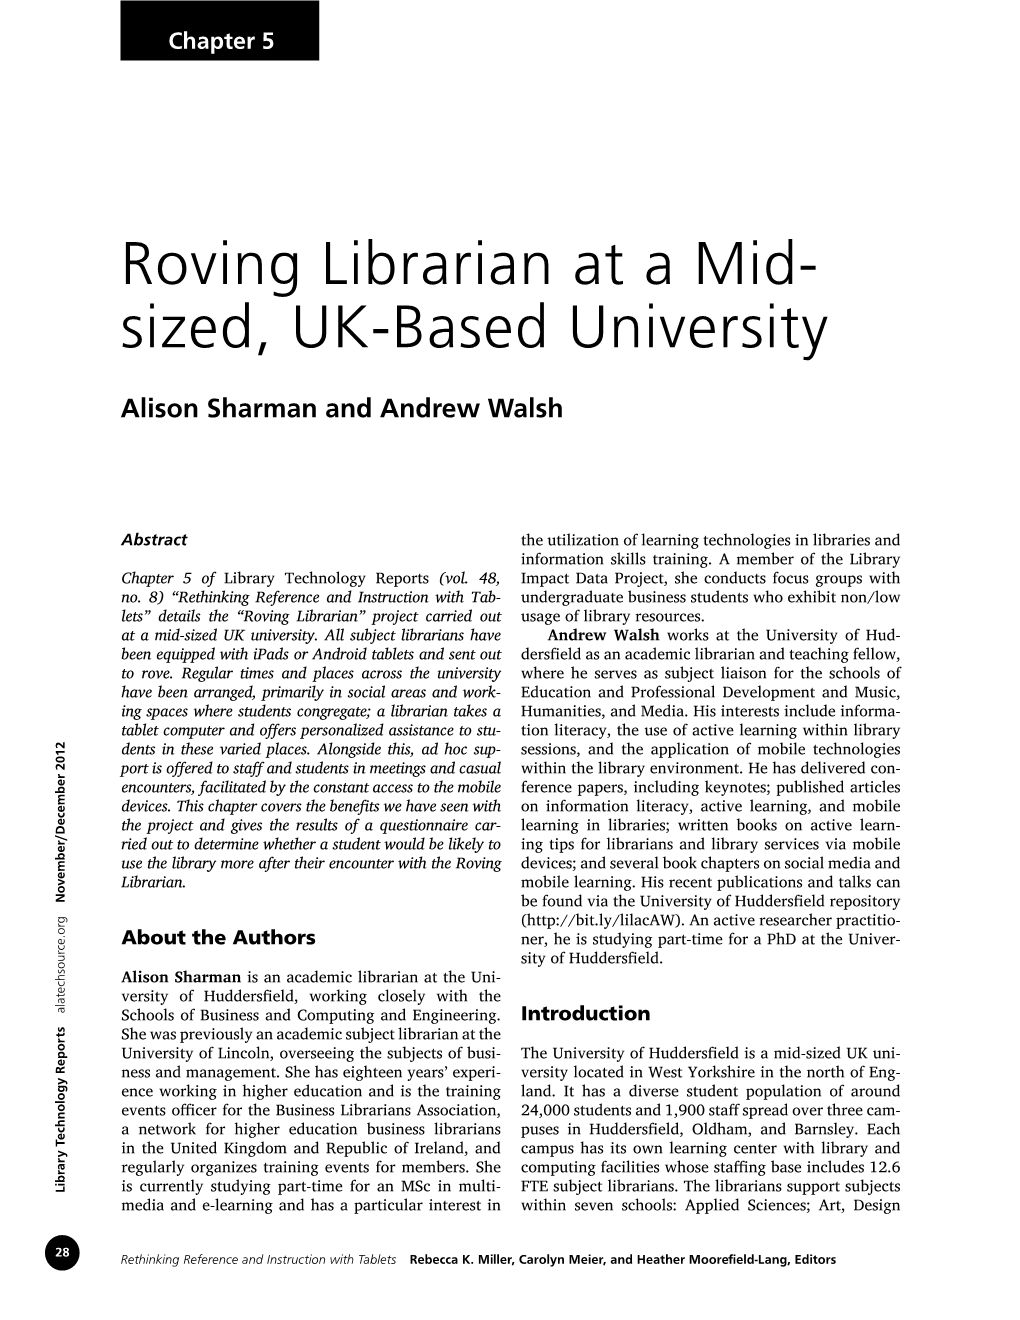 Roving Librarian at a Mid- Sized, UK-Based University